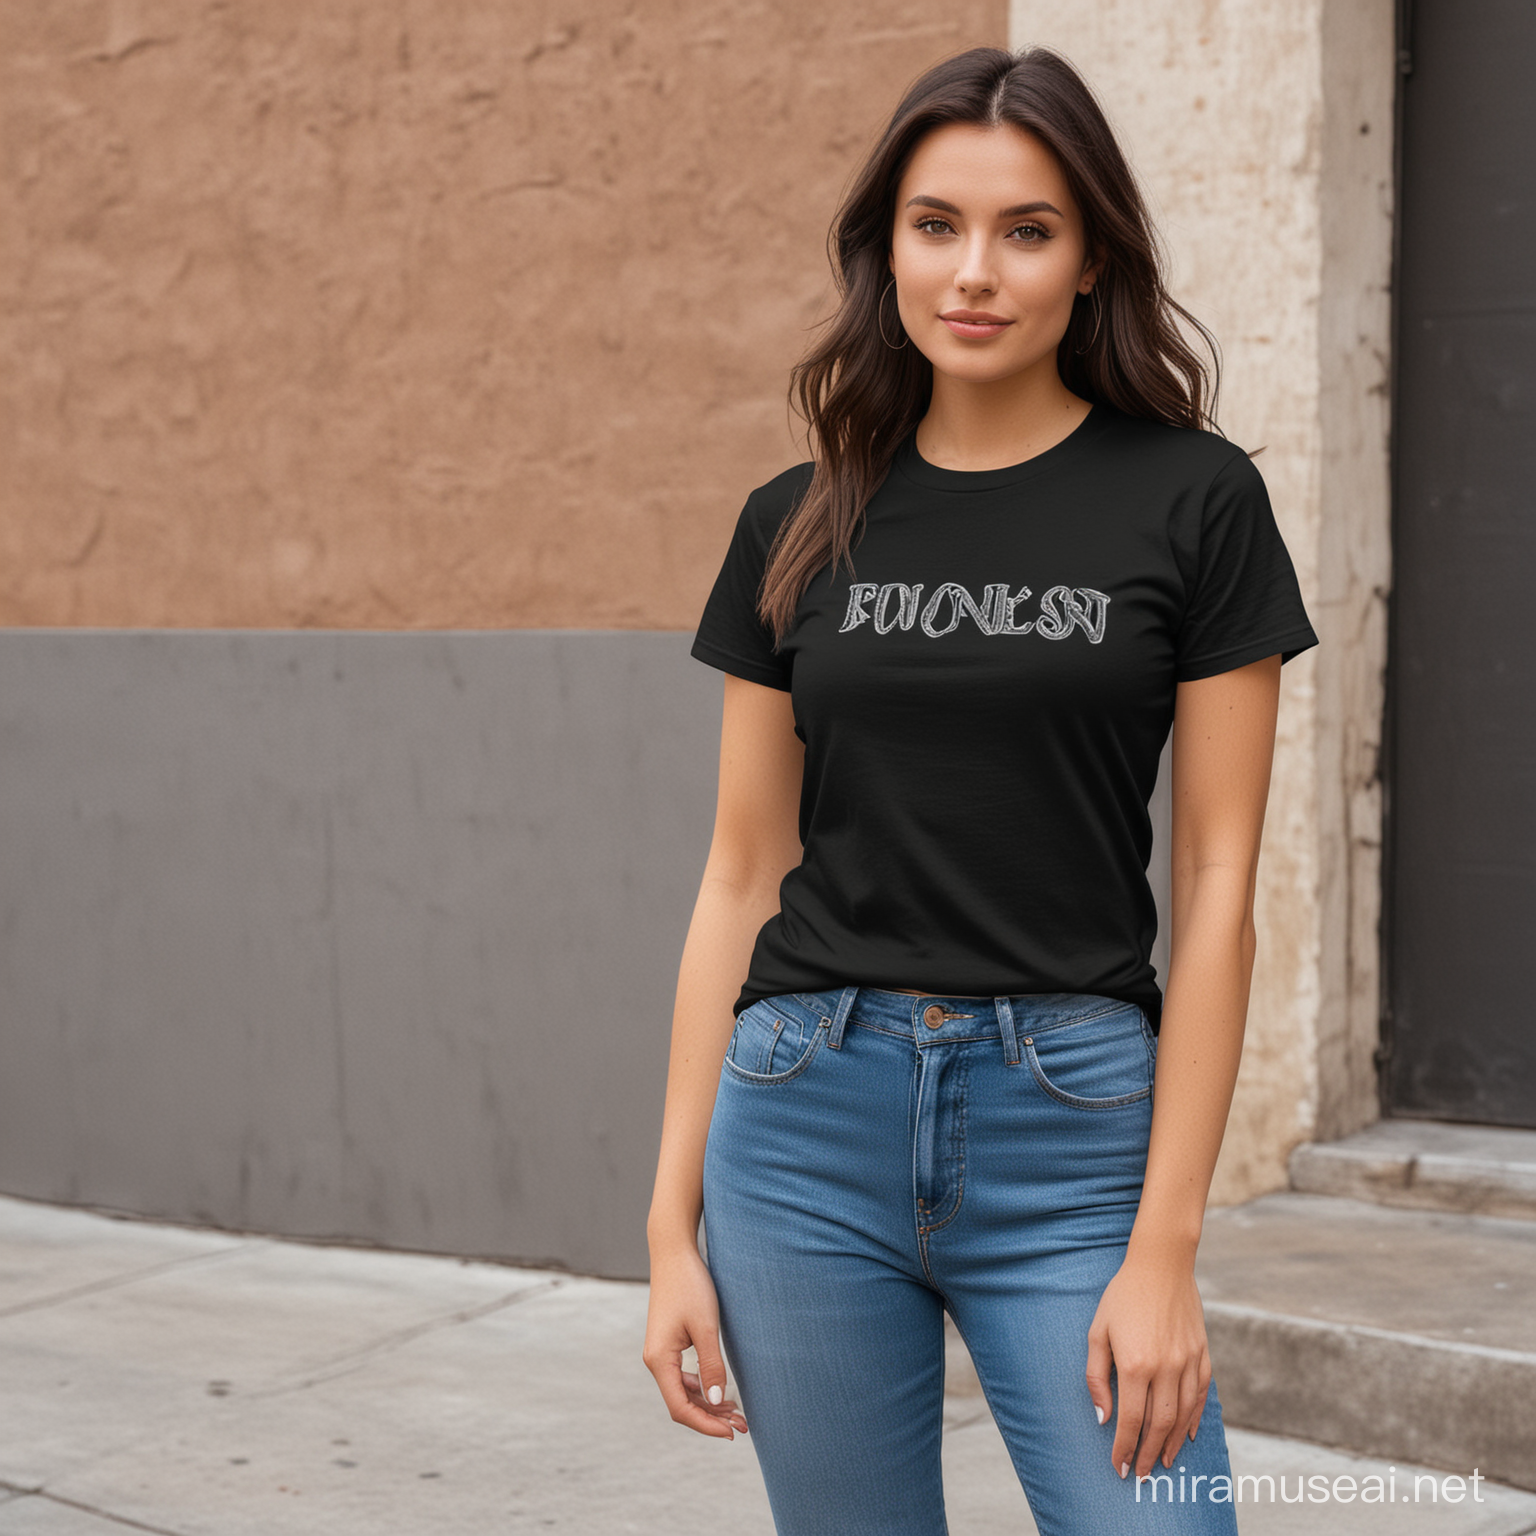 Bella + canvas 3001 mockup in black 
with a blank t-shirt worn by models